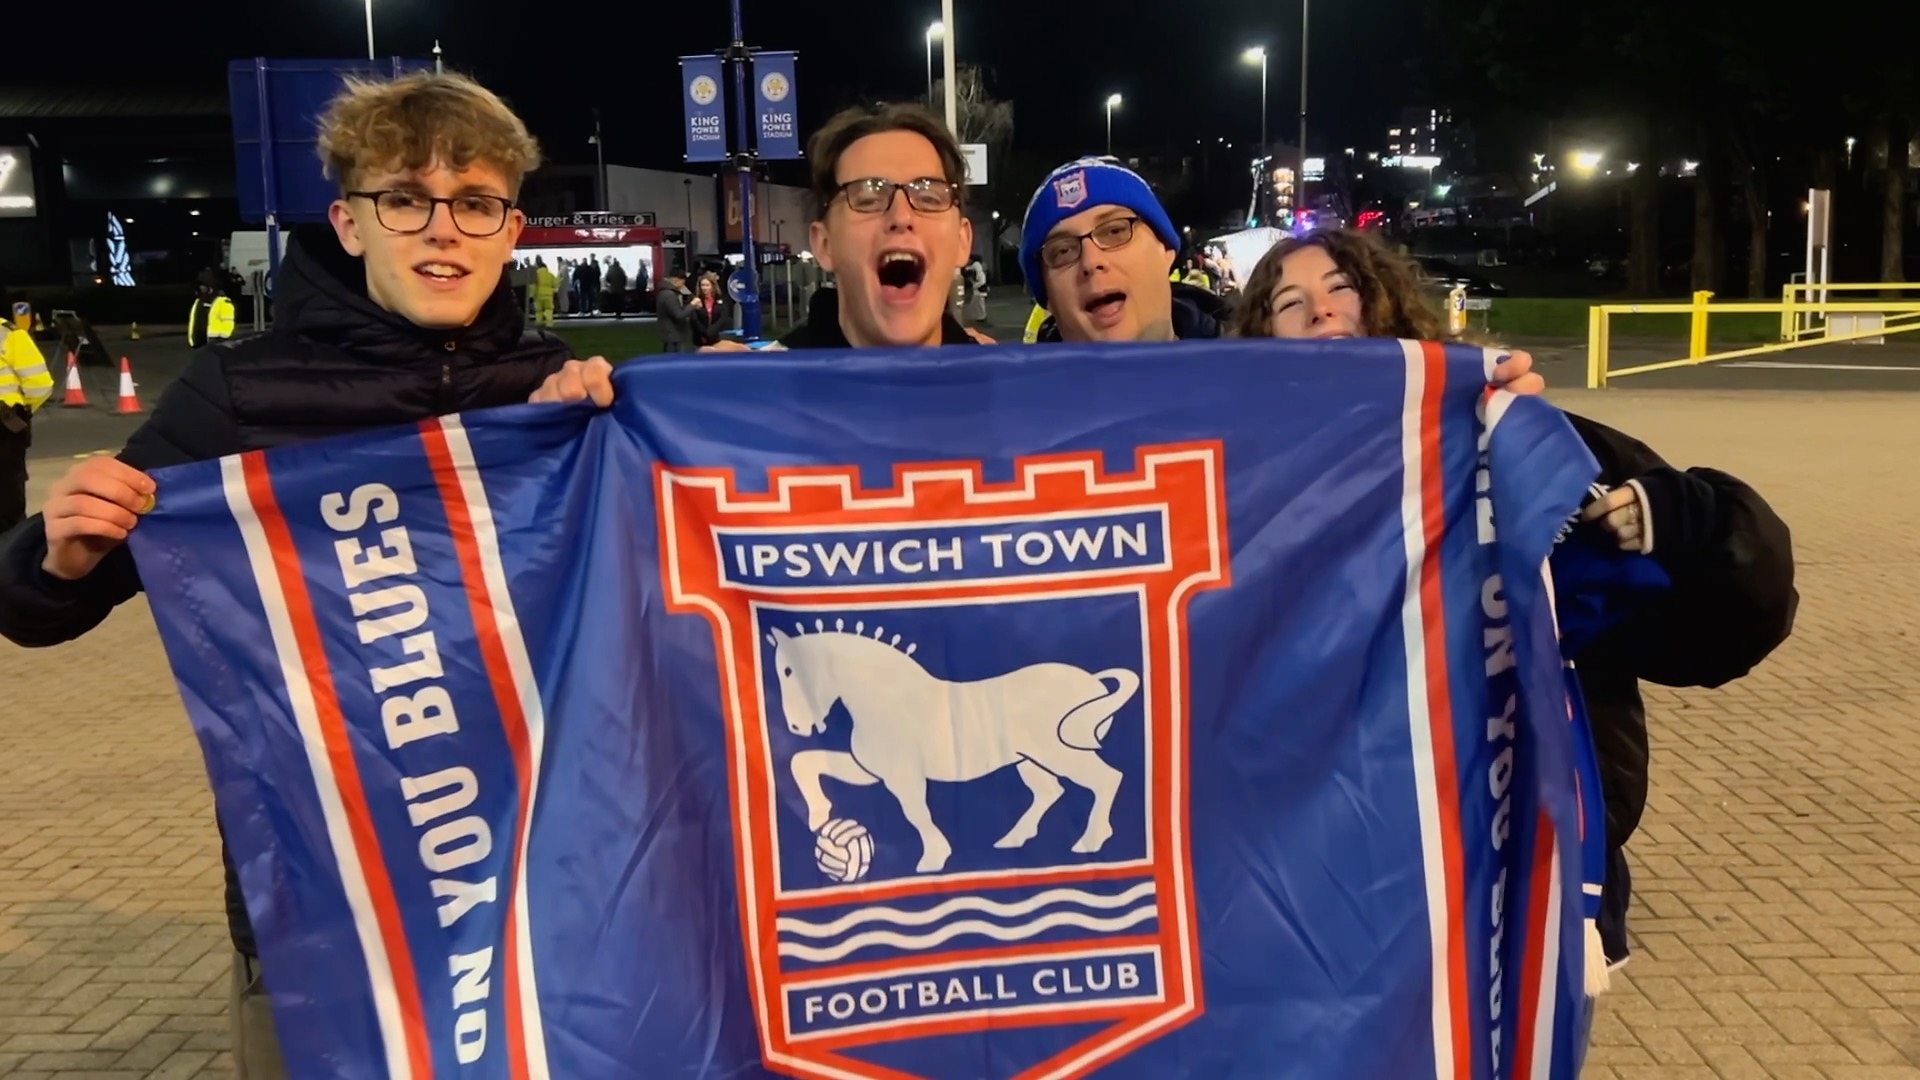 Ipswich Town fans happy with team's display after Leicester draw